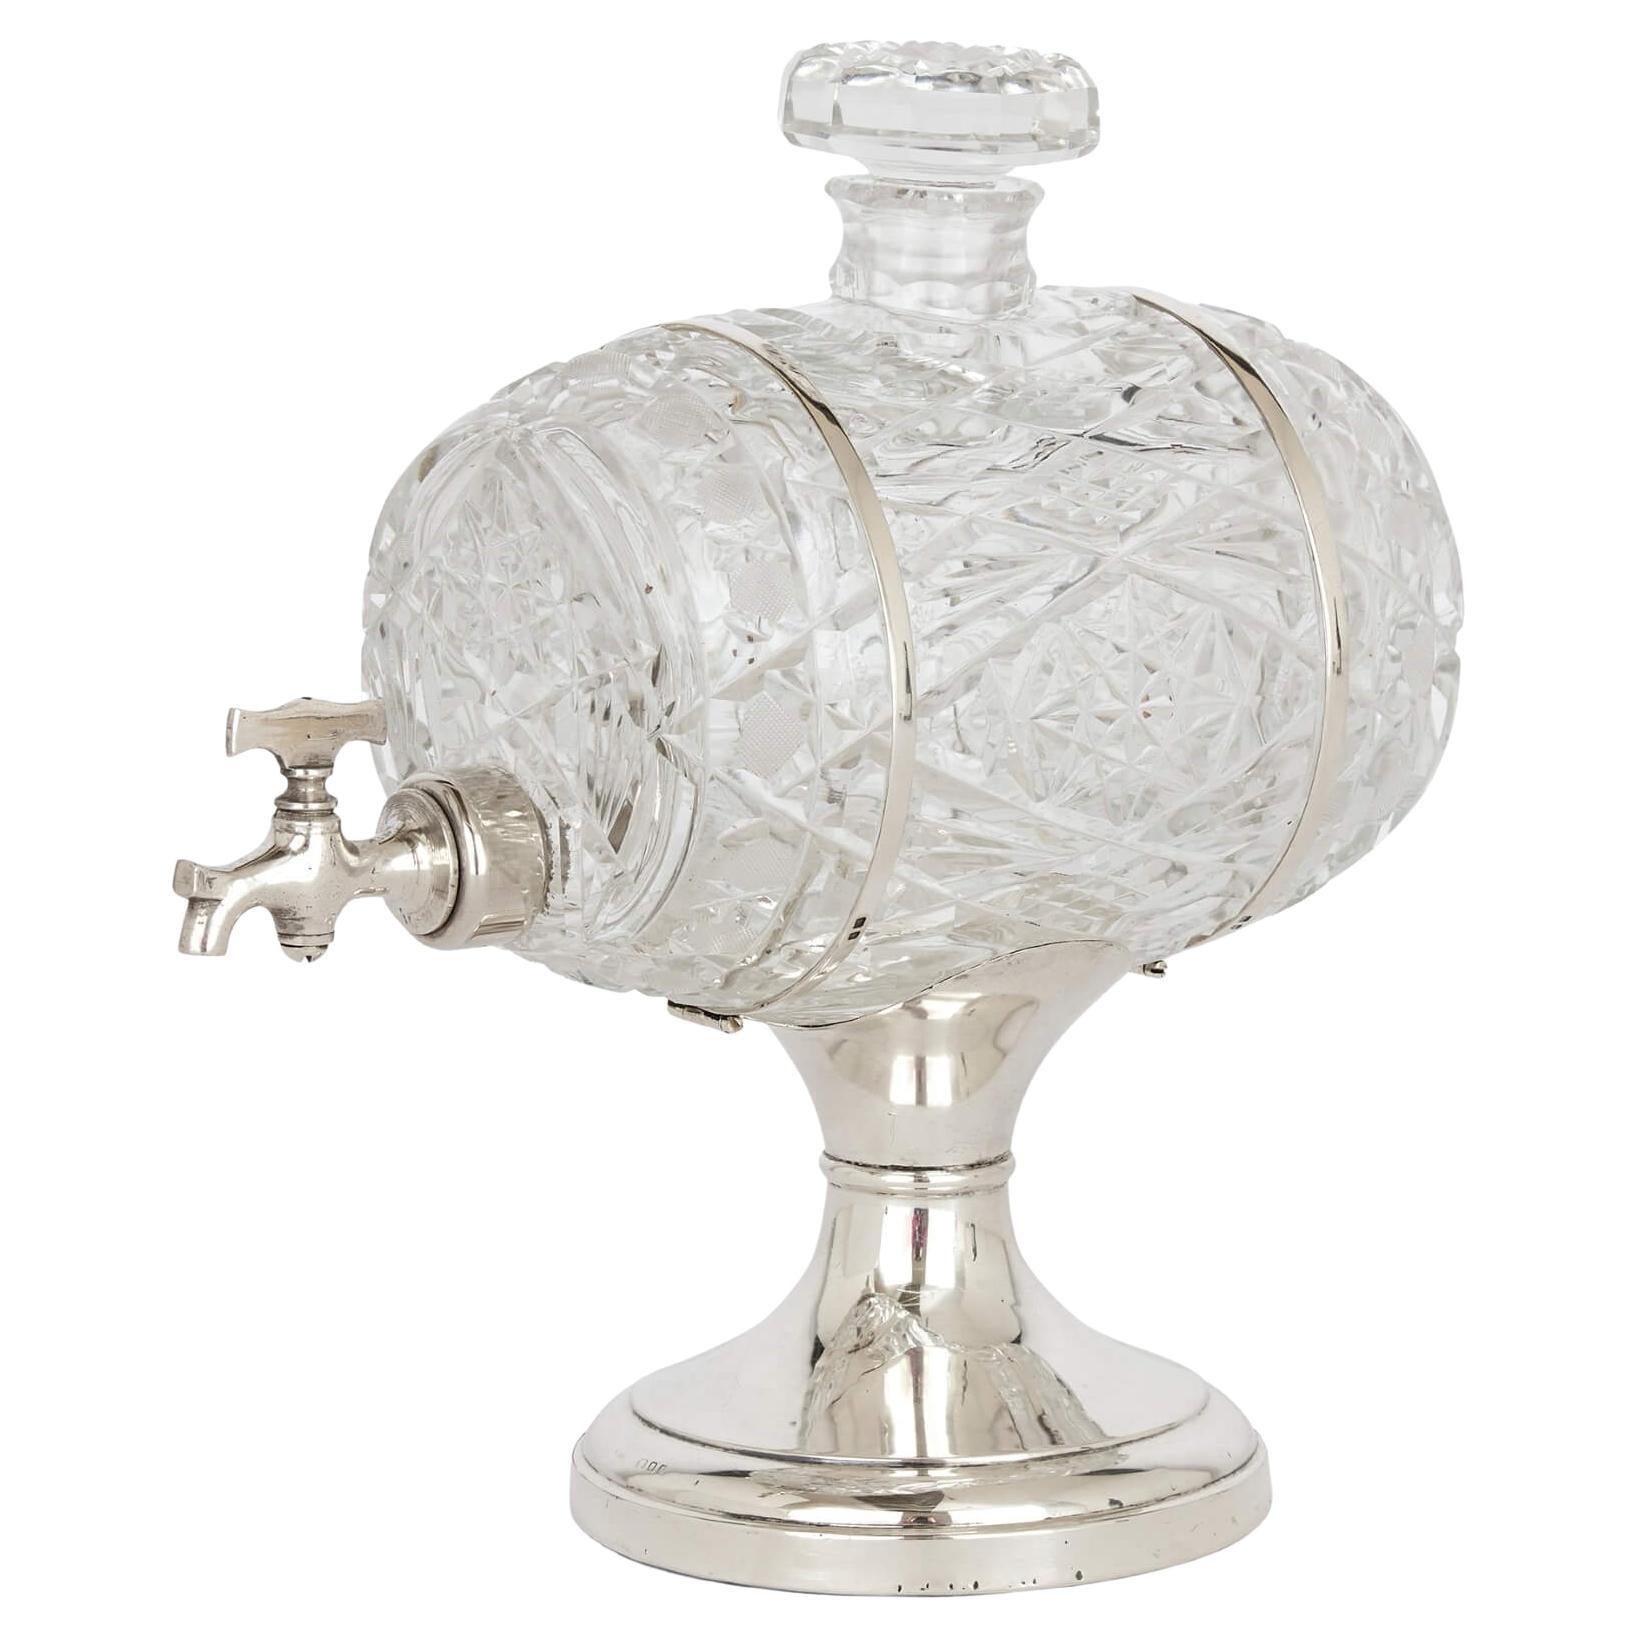 English Crystal and Silver Barrel Decanter